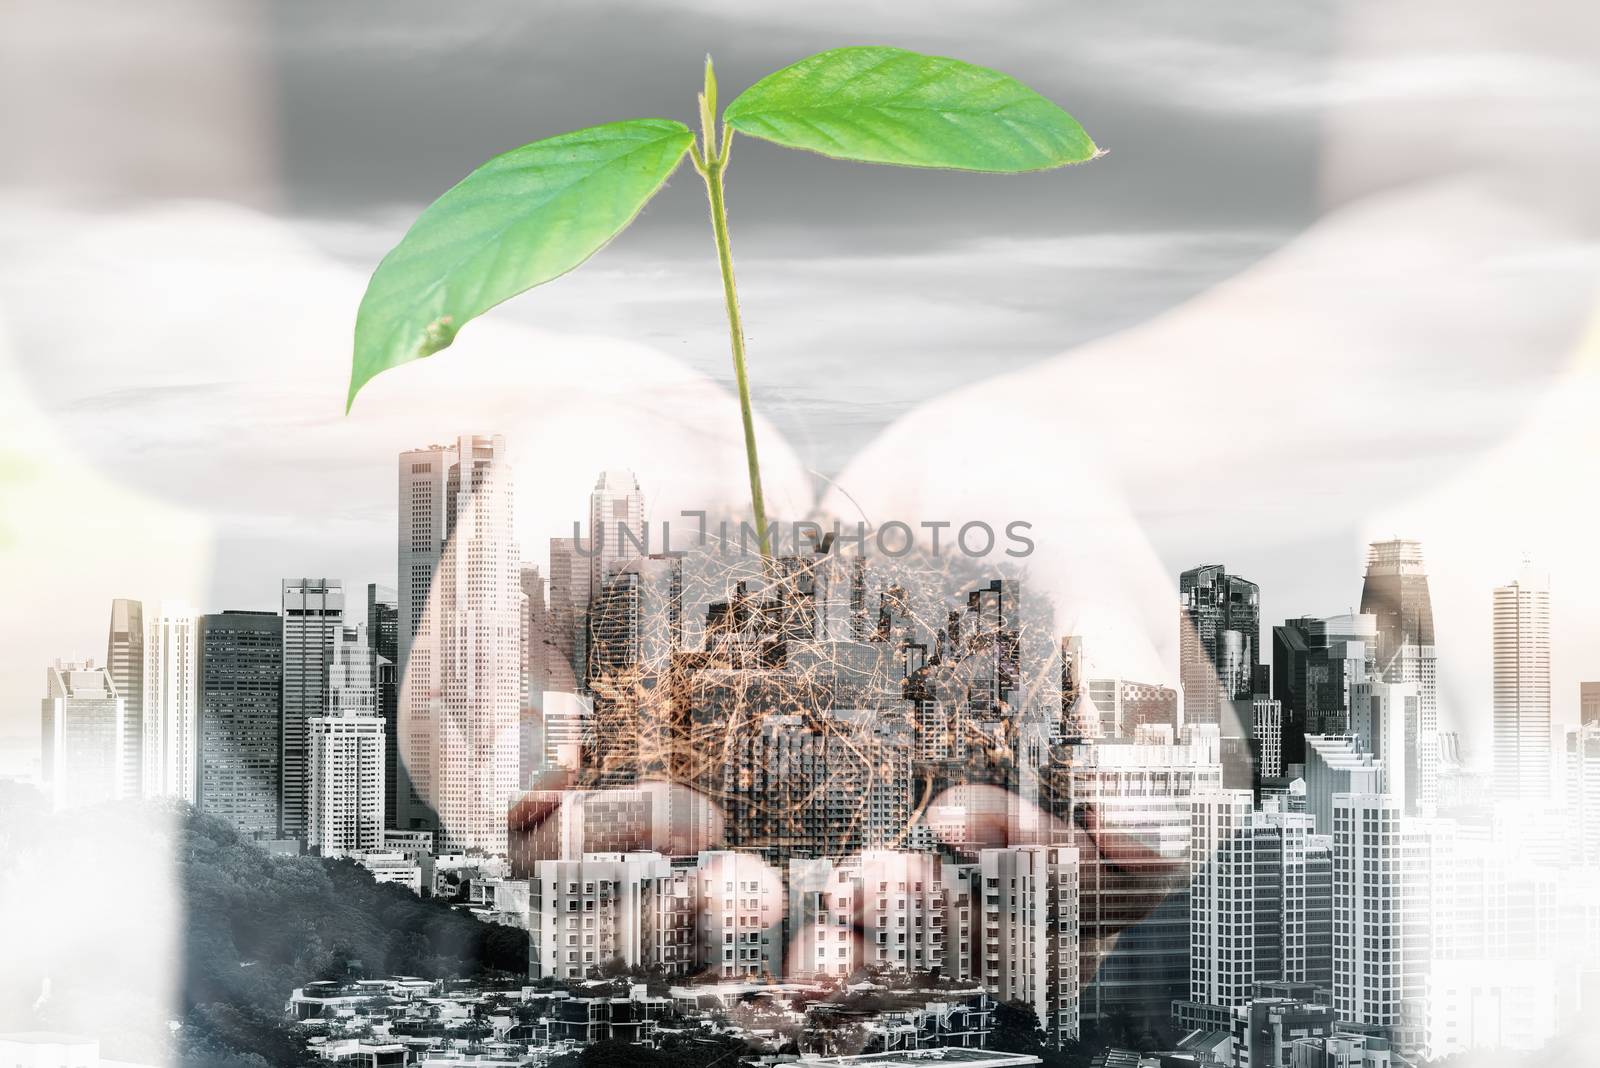 World Eco Friendly for Save The Green Earth Concept, Double Exposure Images of Woman Hands is Holding Tree Seeding With Cityscape Background. Eco Saving Green City for World Environment Sustainable